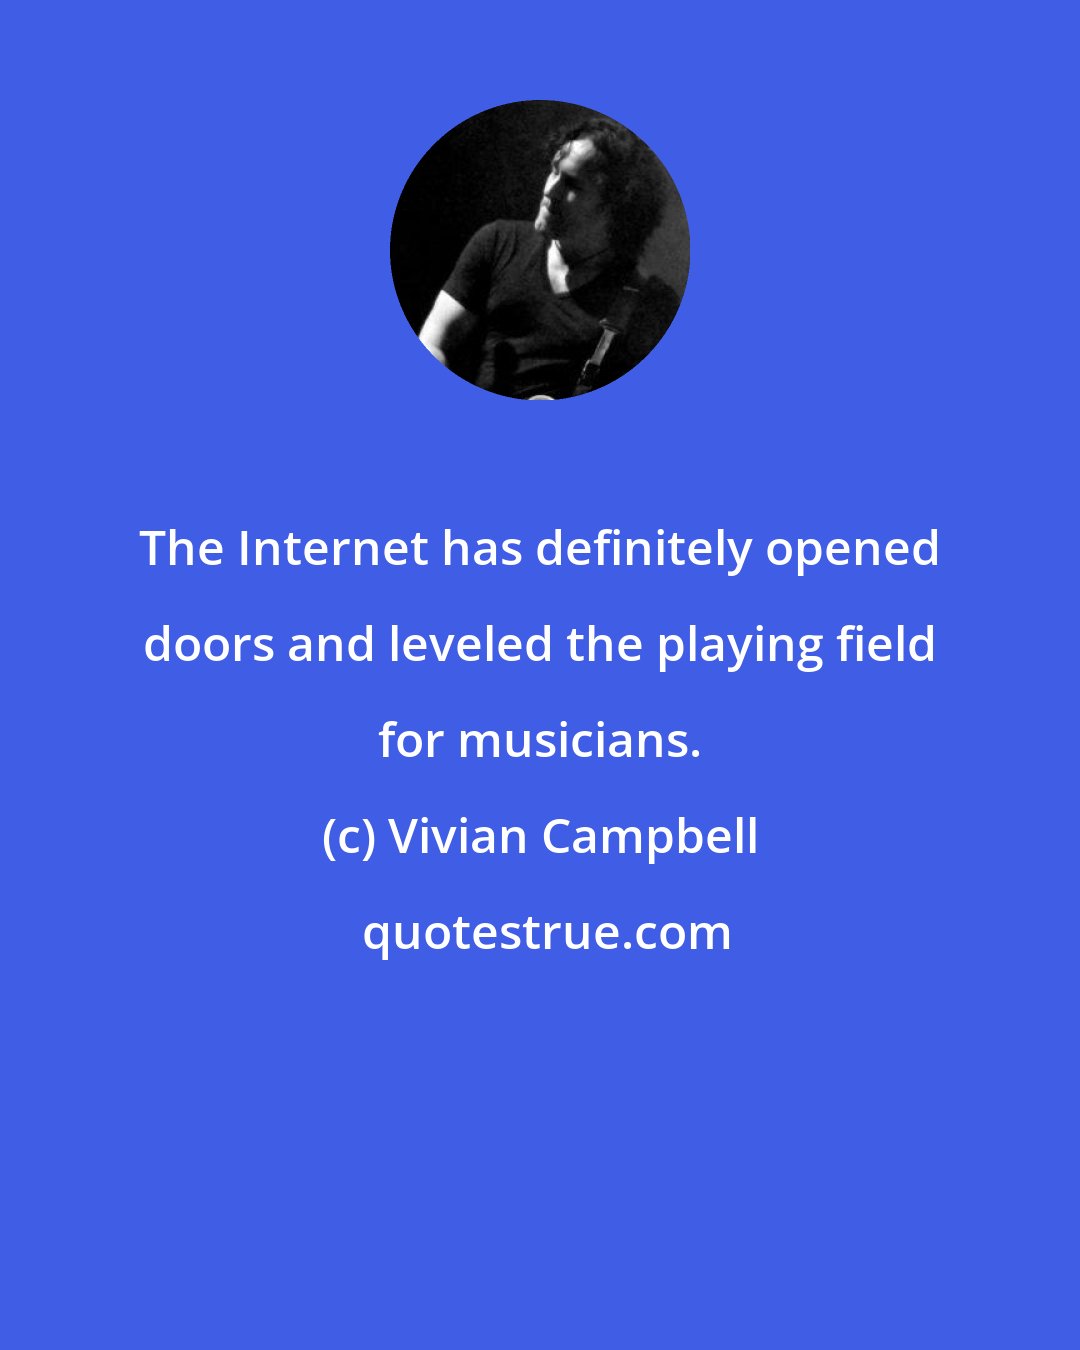 Vivian Campbell: The Internet has definitely opened doors and leveled the playing field for musicians.